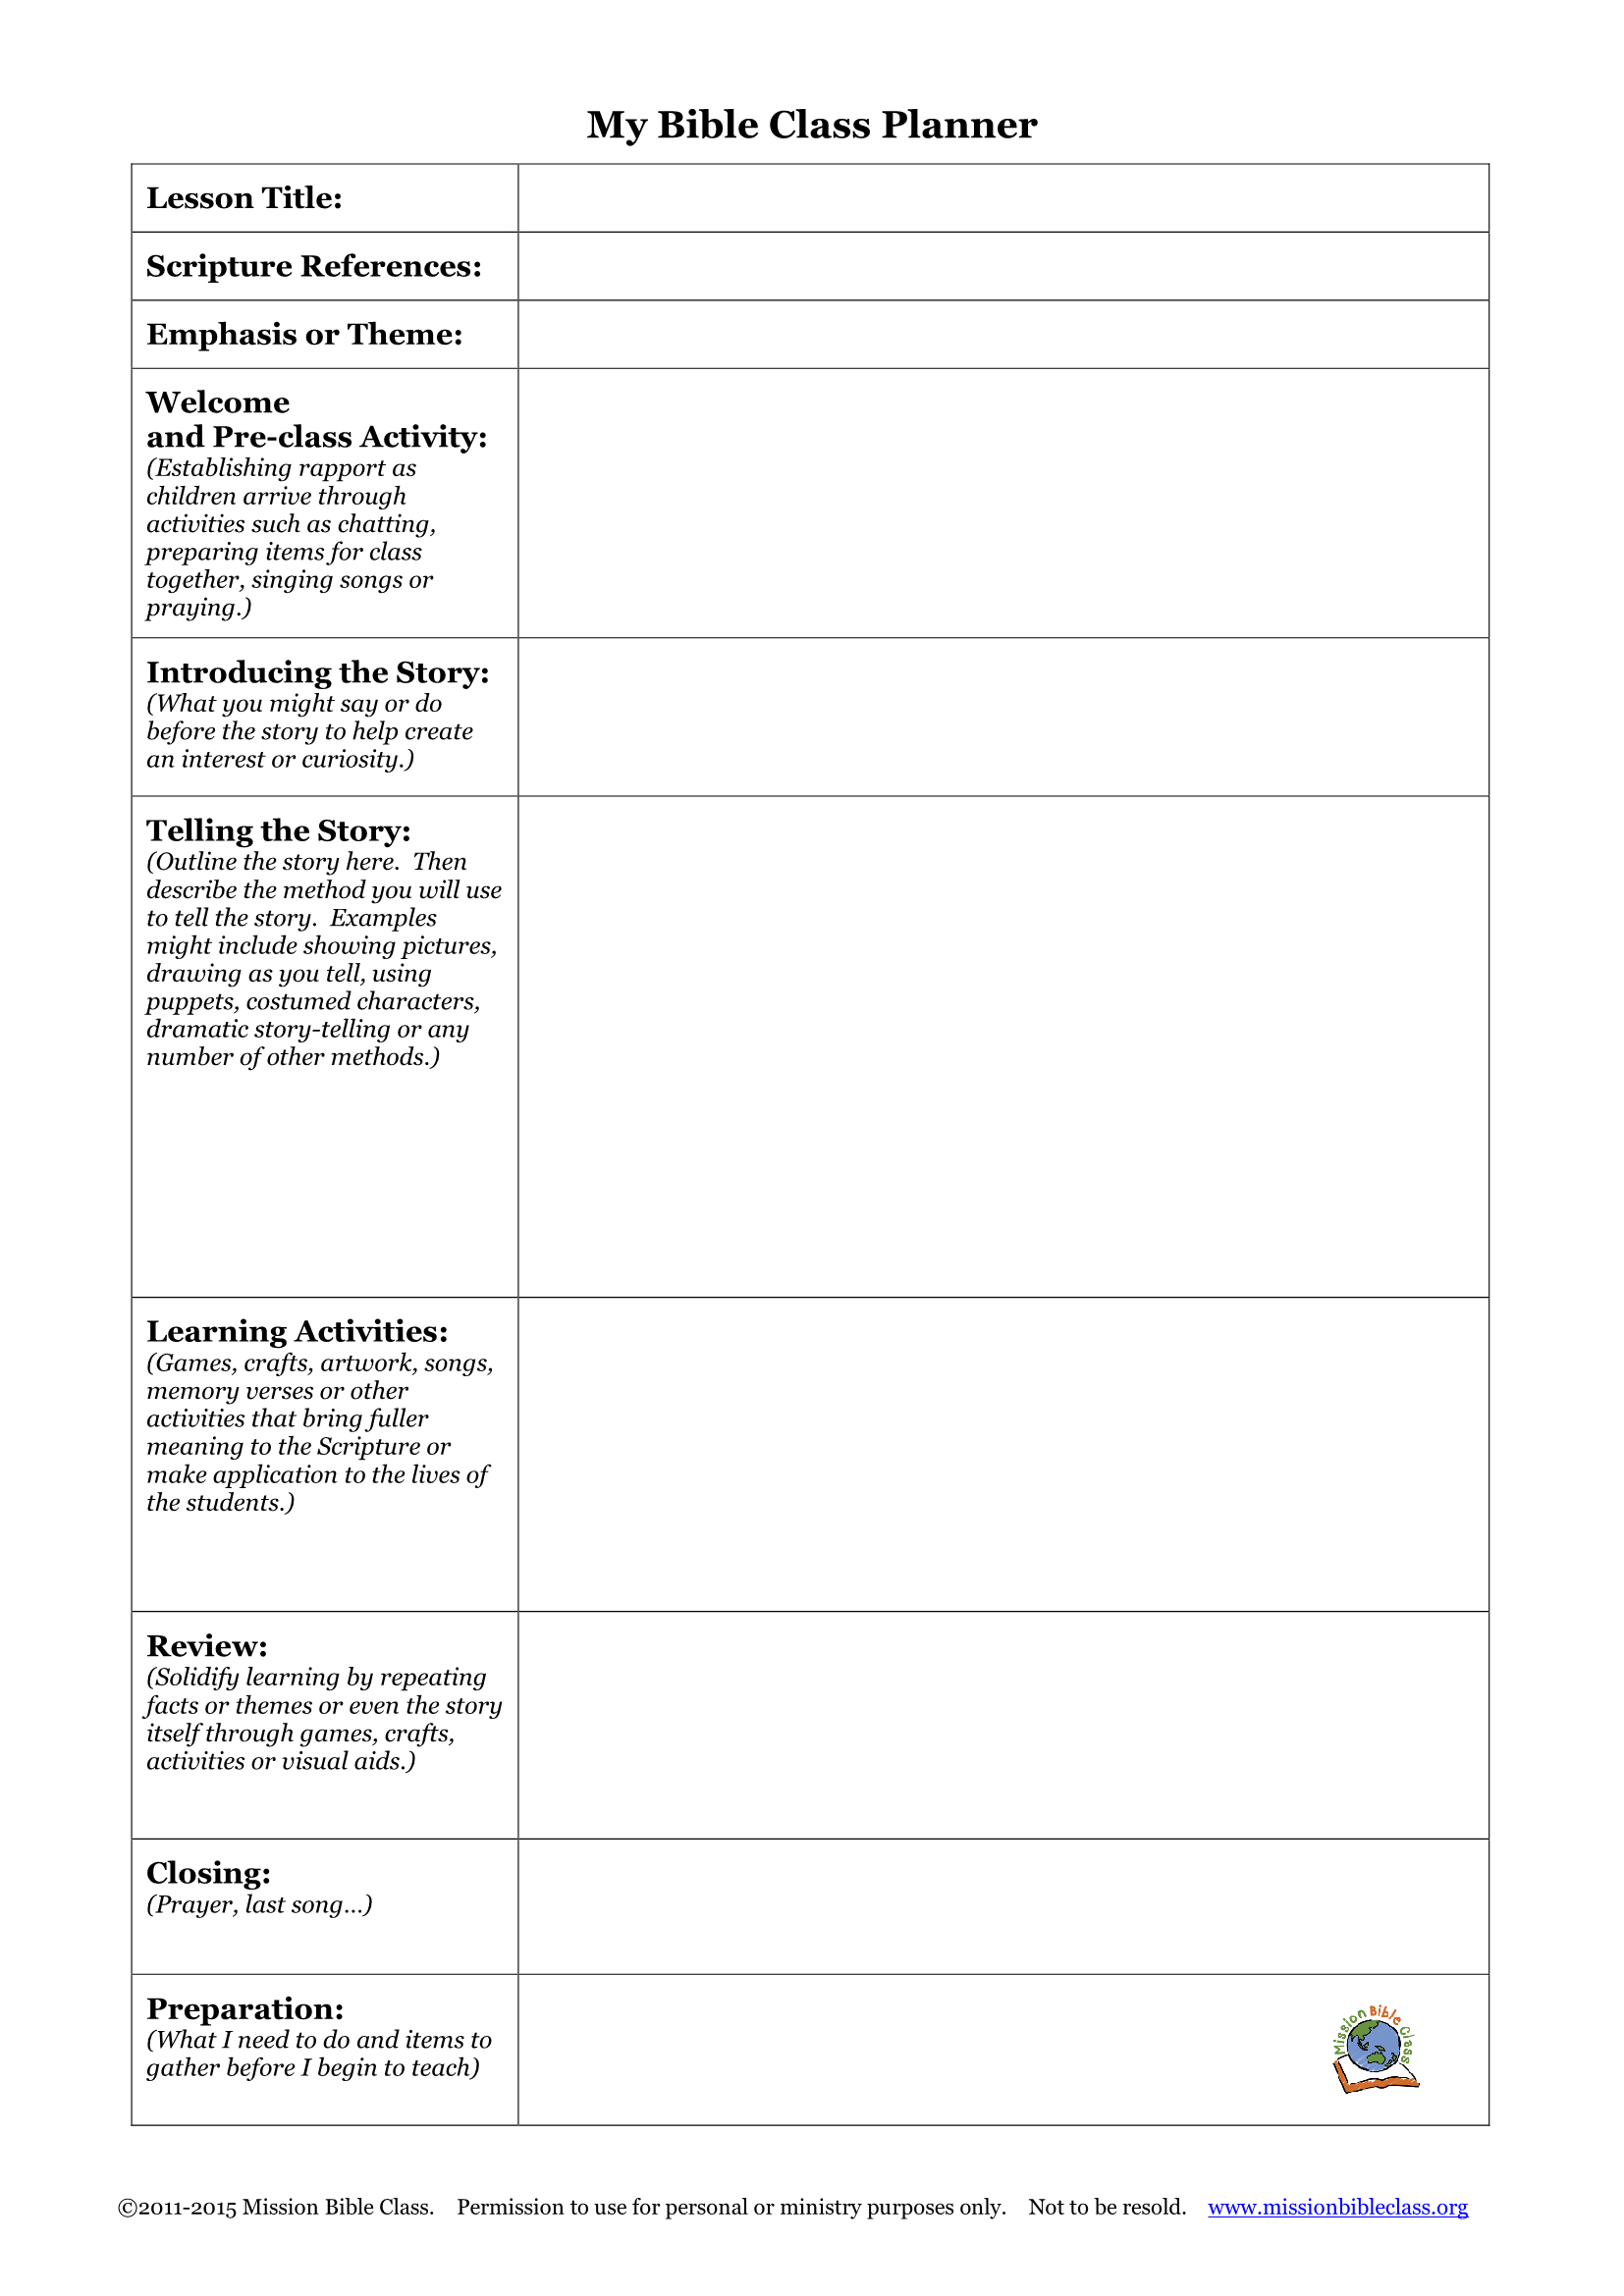 Blank Lesson Plan Templates To Print – Mission Bible Class - Free Printable Ladies Bible Study Lessons